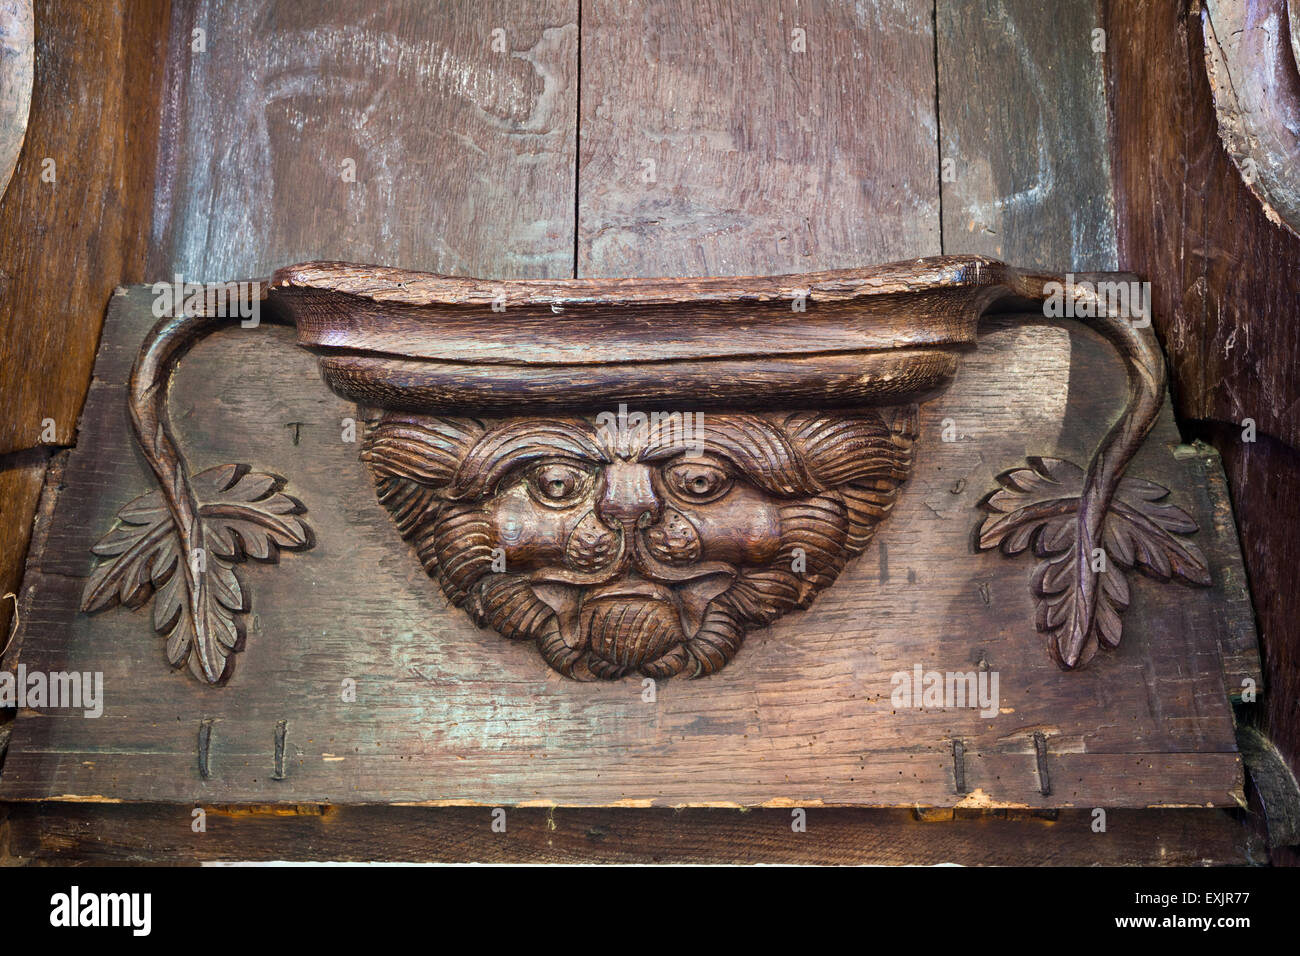 A misericord in St Michaels church in the Cotswold village of Duntisbourne Rouse, Gloucestershire UK Stock Photo